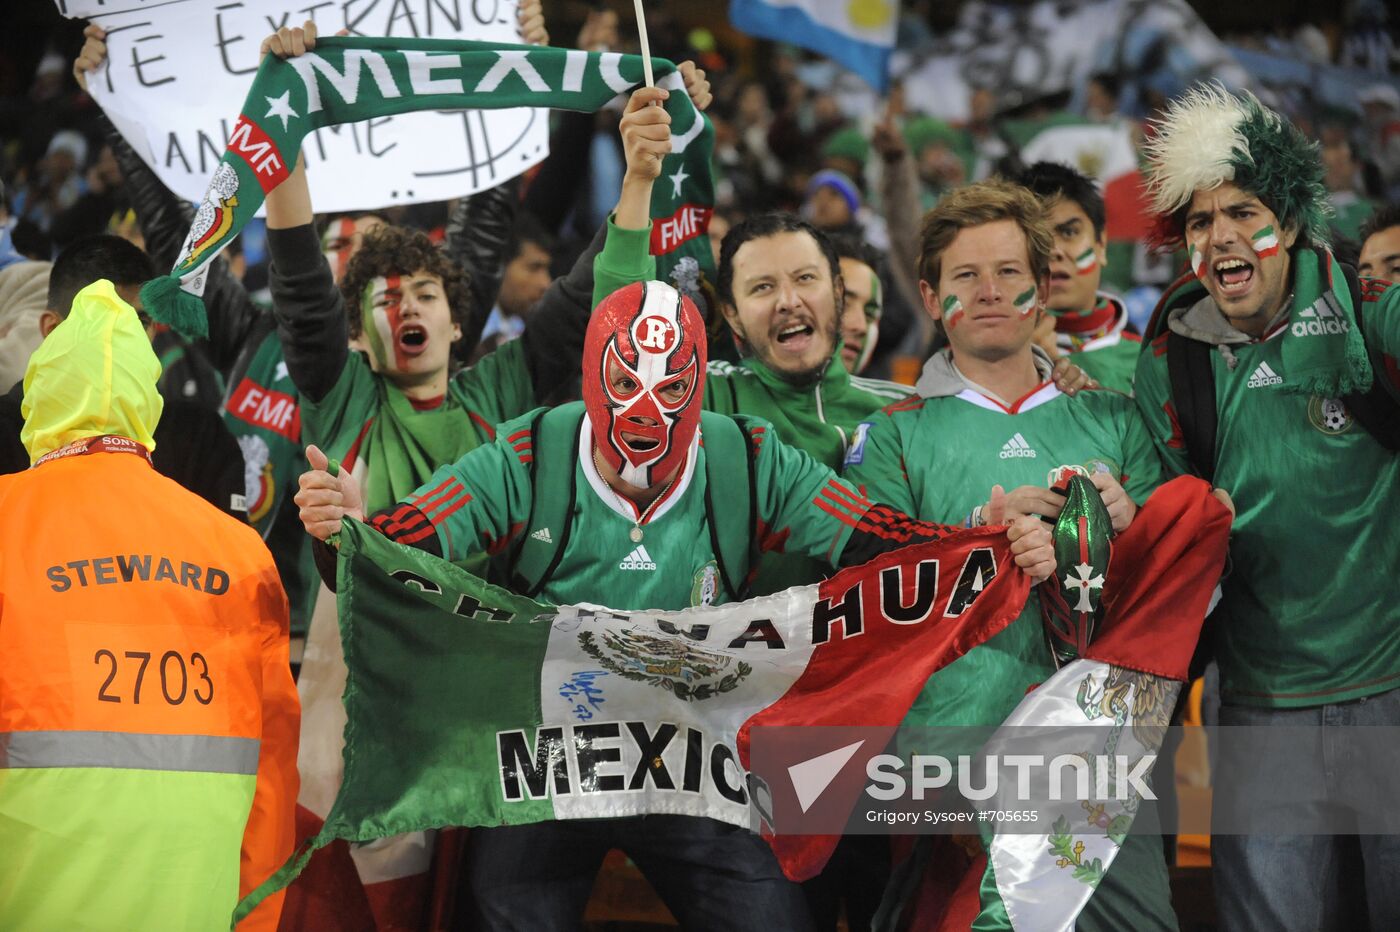 Fans of Mexico national team